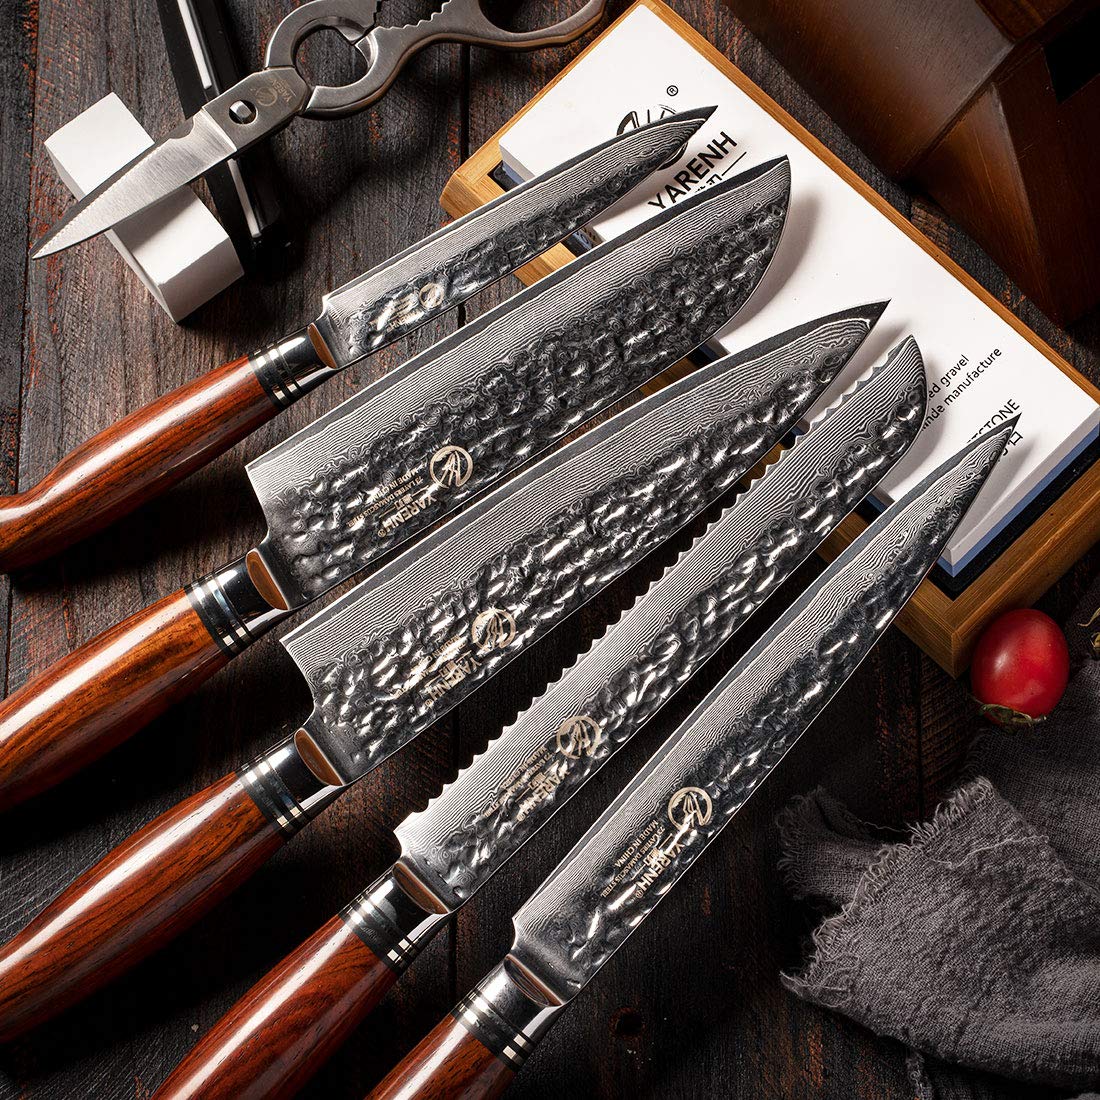 YARENH Kitchen Knife Set, 8 Piece Professional Damascus Chef Knives, Sharp High Carbon Stainless Steel Blade, 73 Layers, Full Tang, Dalbergia Wood Handle, Walnut Wooden Block and Sharpener Stone